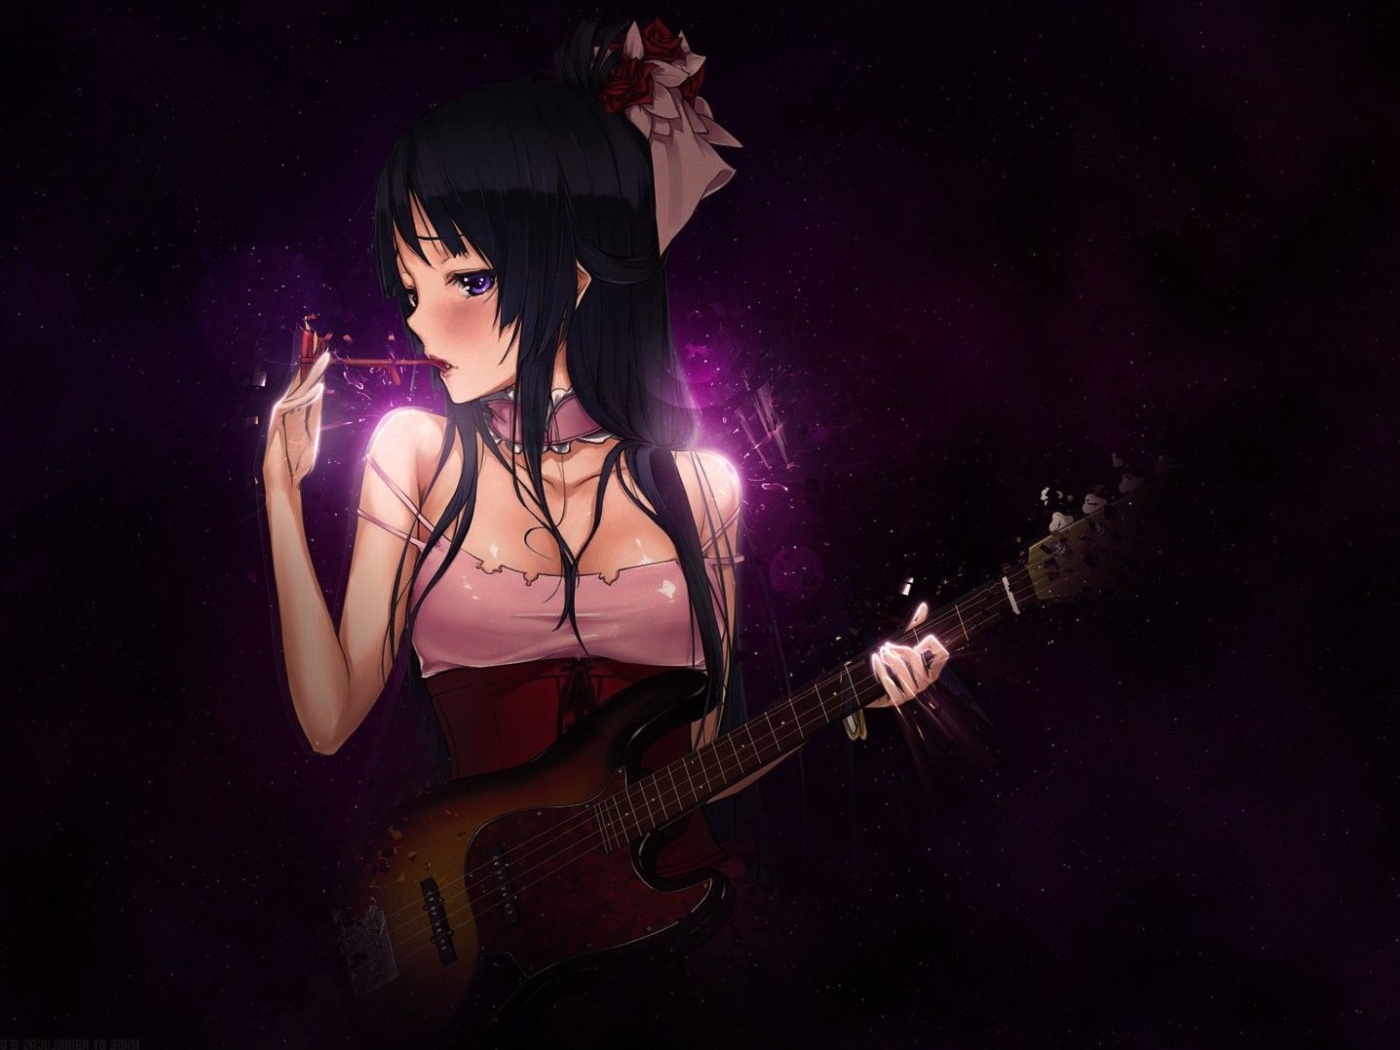 Anime Girl with Guitar wallpaper 1400x1050